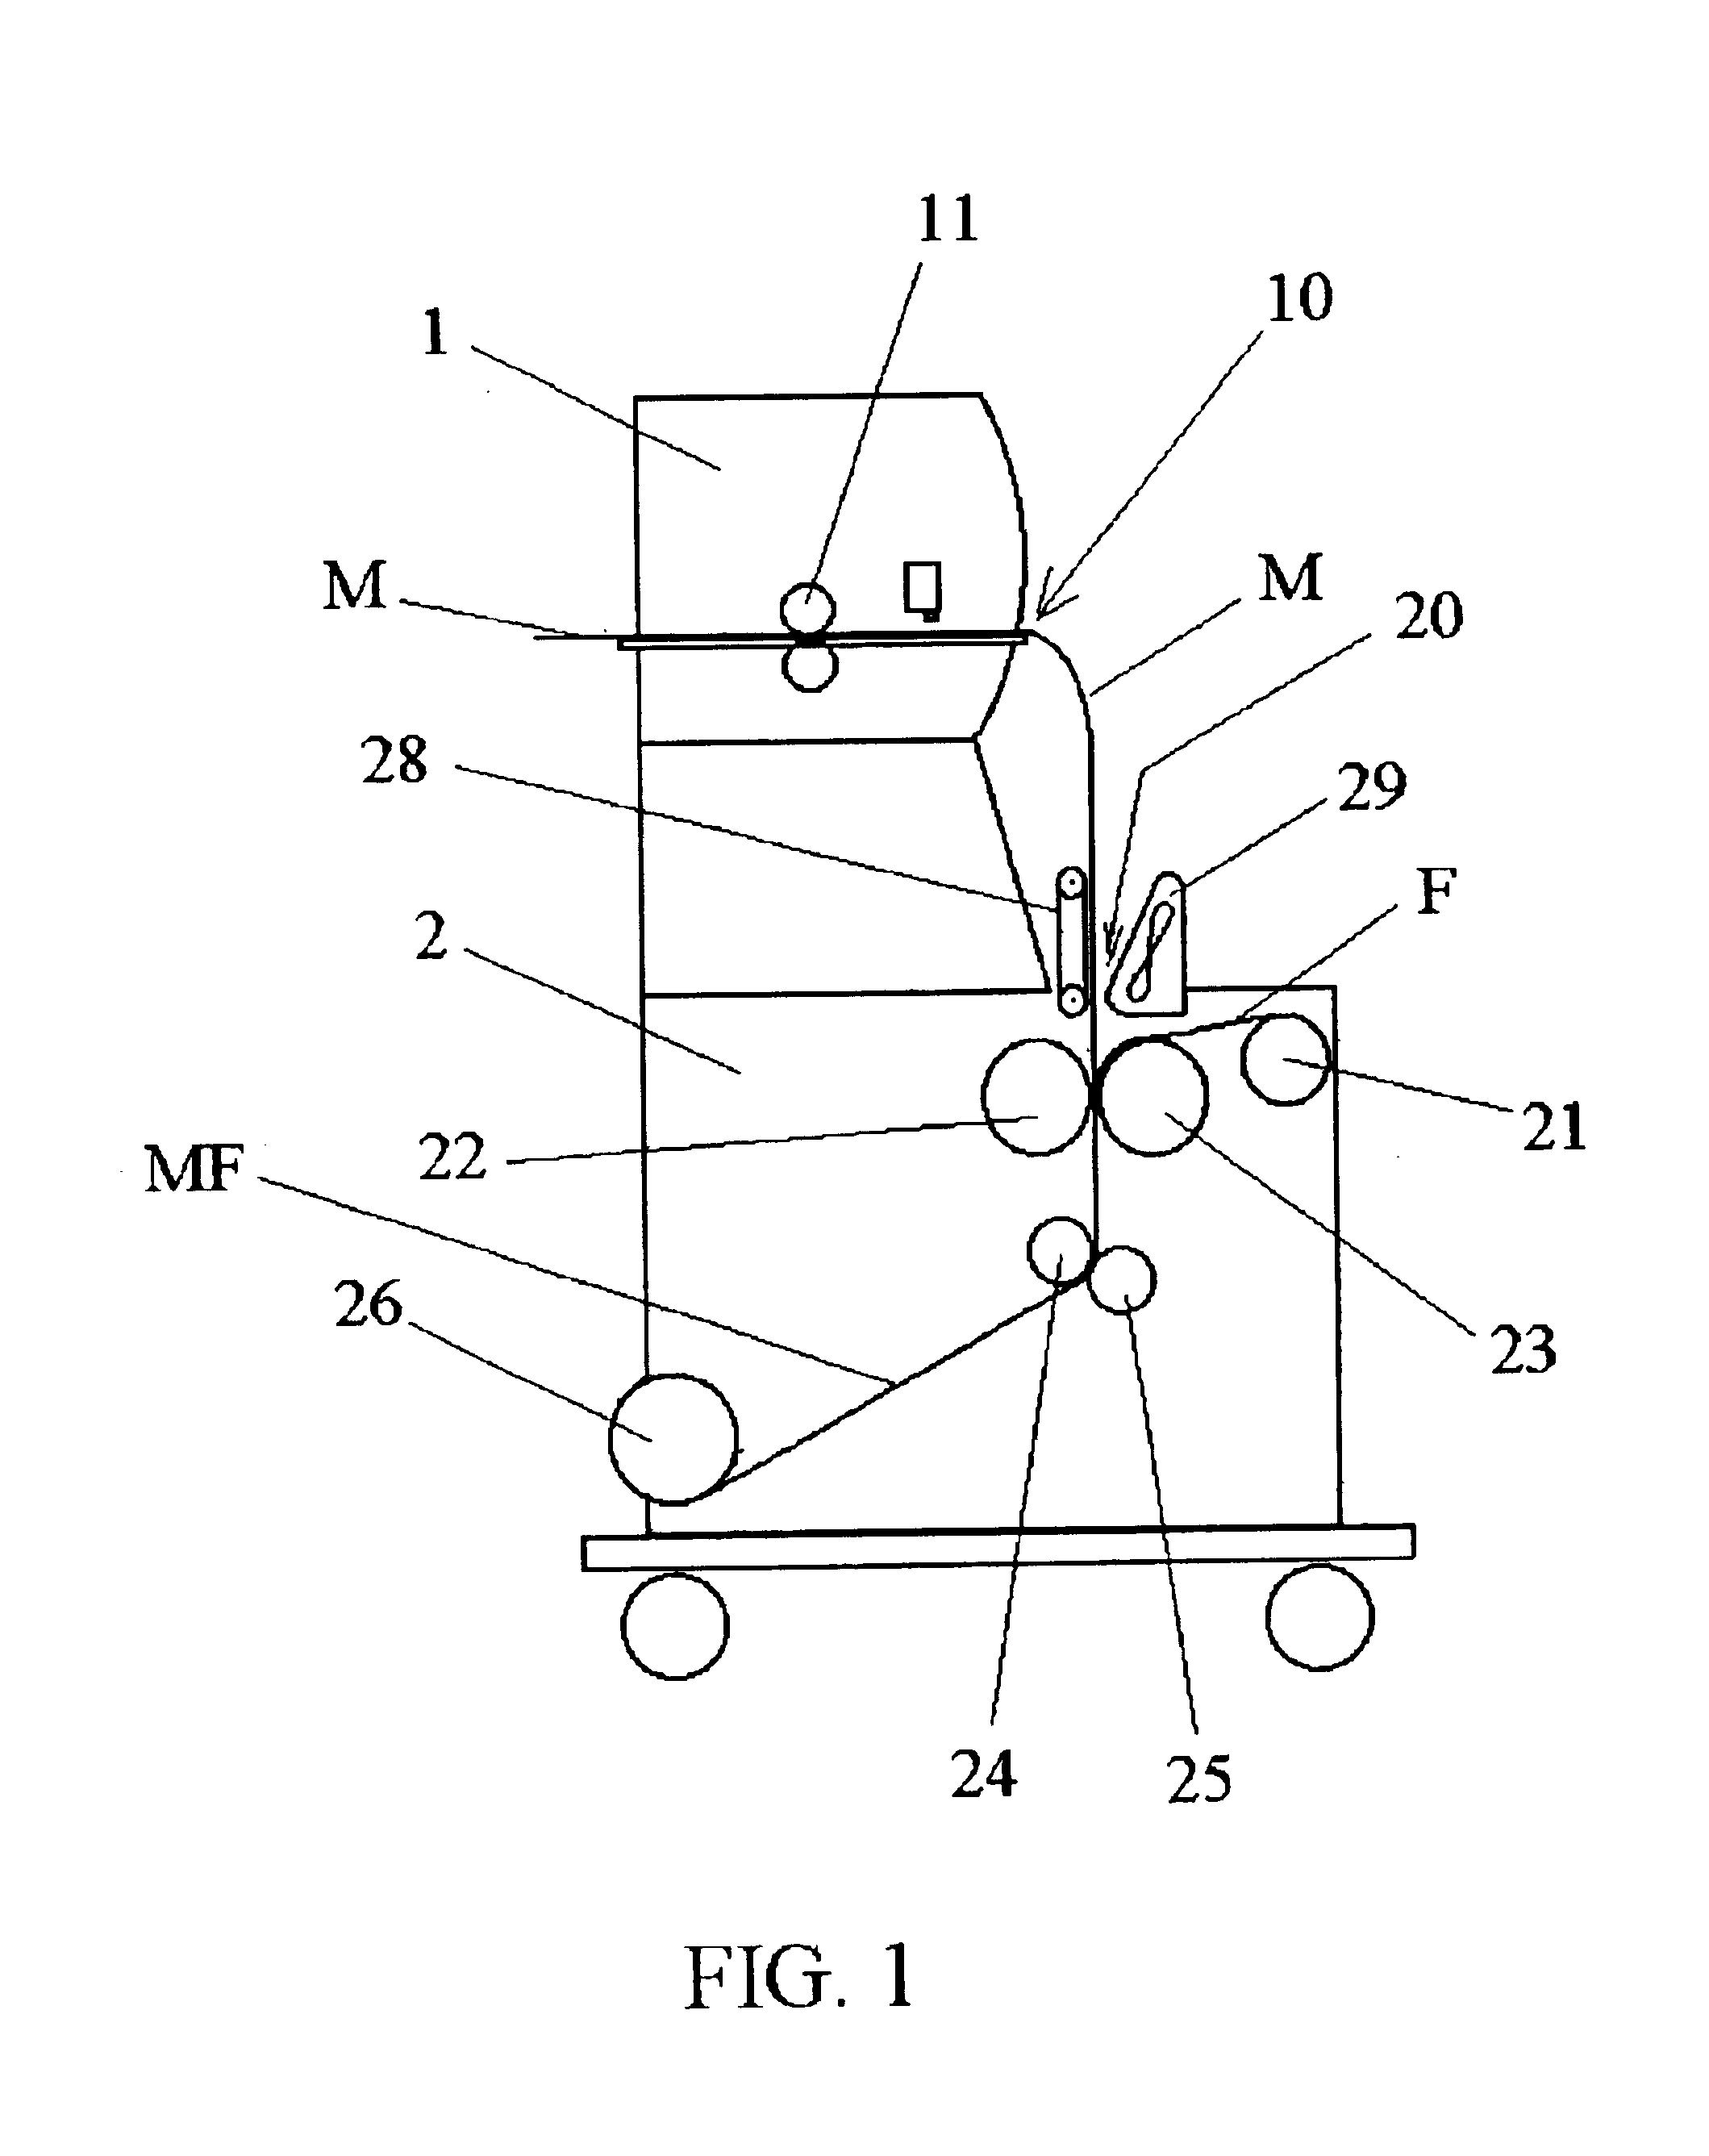 Printing apparatus and a method for loading media in said apparatus